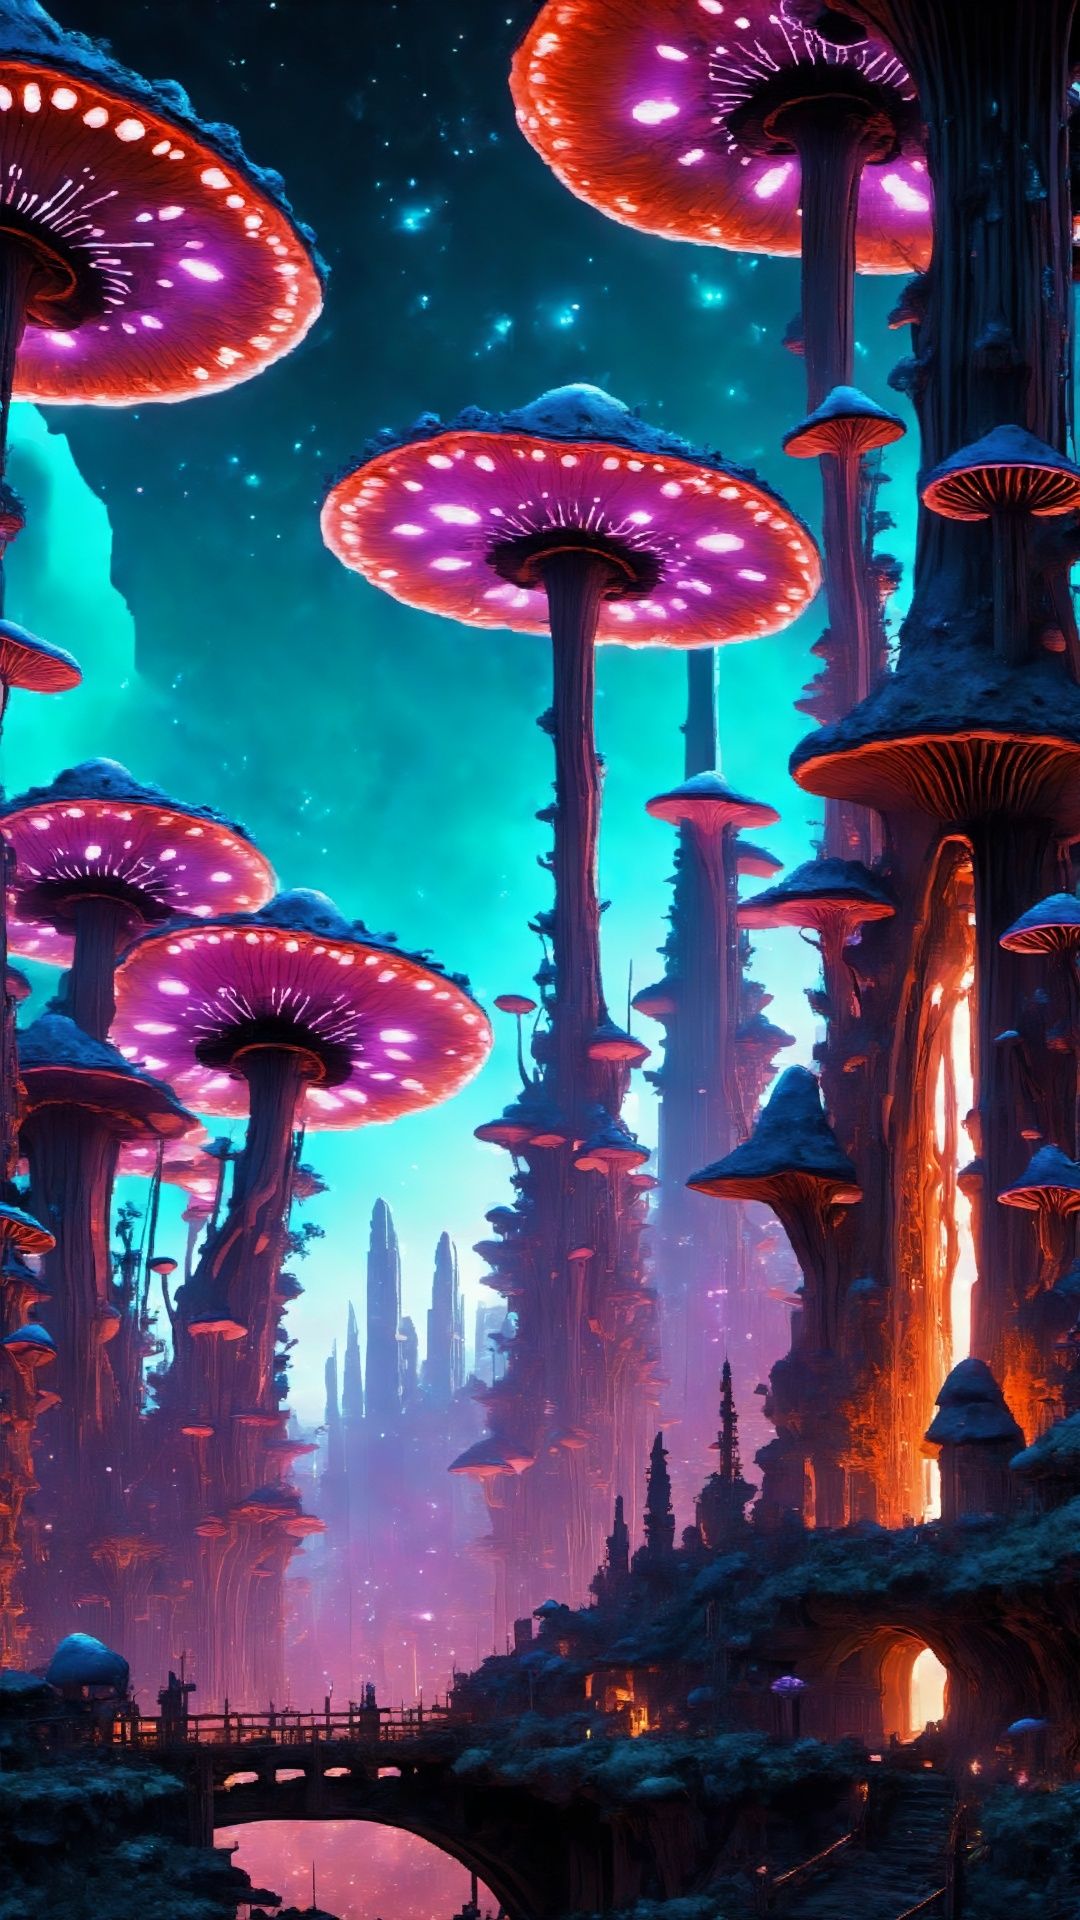 (Fantasy Architectural Style) (Fantasy Scene) (Advanced Color Art) (Architectural Art) (Intricate Details) In this macro and long-distance fantasy architectural picture, in addition to supernatural buildings, there are also strange alien mushroom landscapes, creating an even more amazing scene. The mountains surrounding the city are home to giant alien mushrooms that tower into the sky, with hats of various shapes that emit strange fluorescent colors. These mushrooms emit a shimmering light that illuminates the surrounding areas of the city, imbuing the entire scene with a sense of magic and mystery. Some mushrooms even emit faint music at night, like natural notes emitting incredible energy.